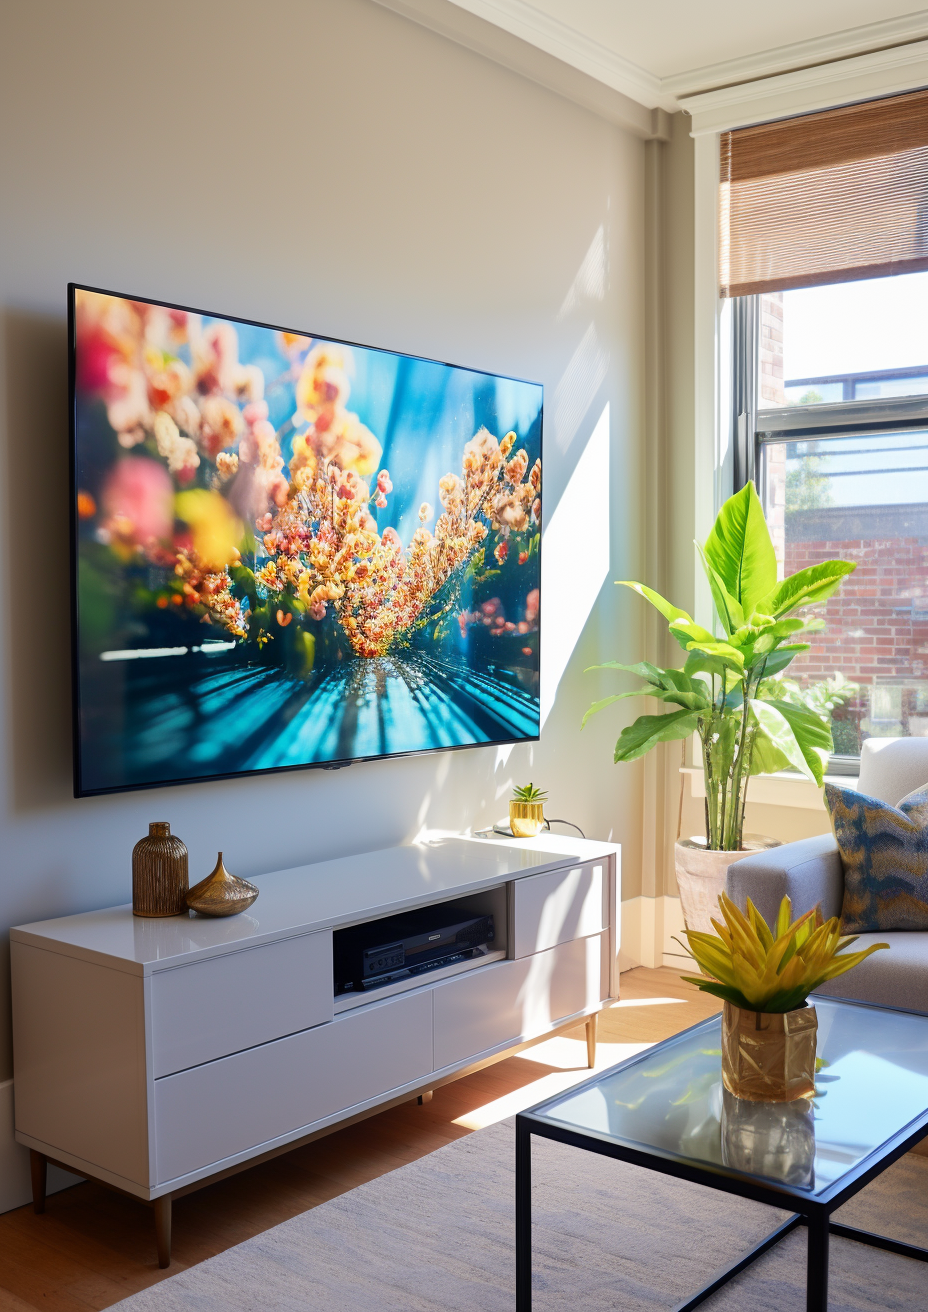 The Best TV For Bright Room